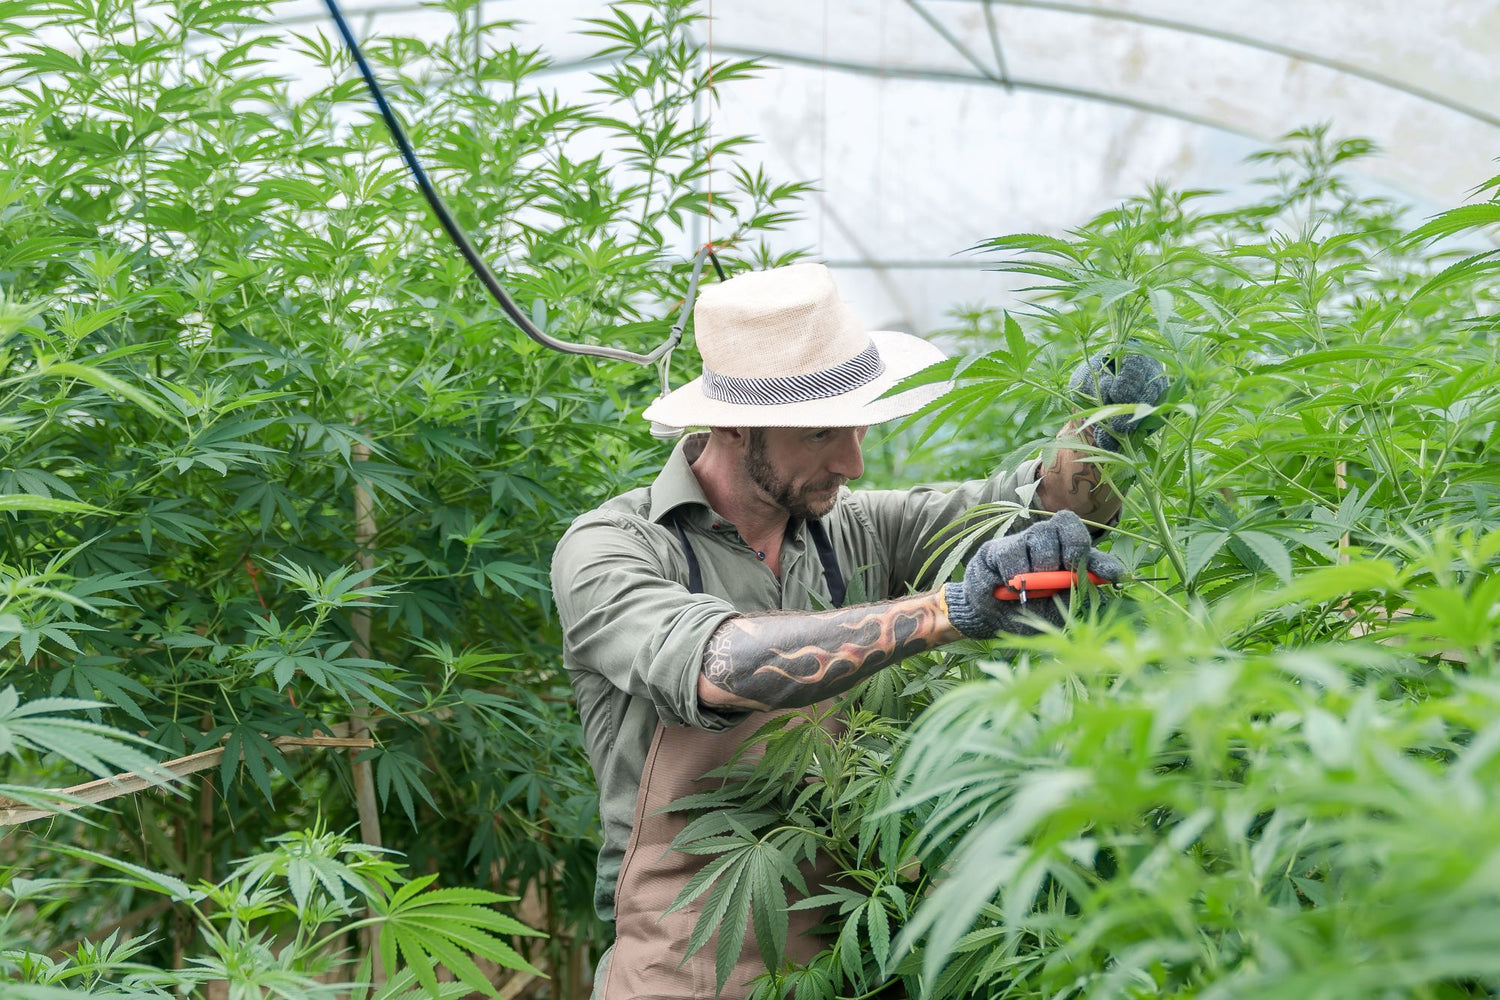 Troubleshooting Your Soil: 5 Common Cannabis Issues and Organic Solutions